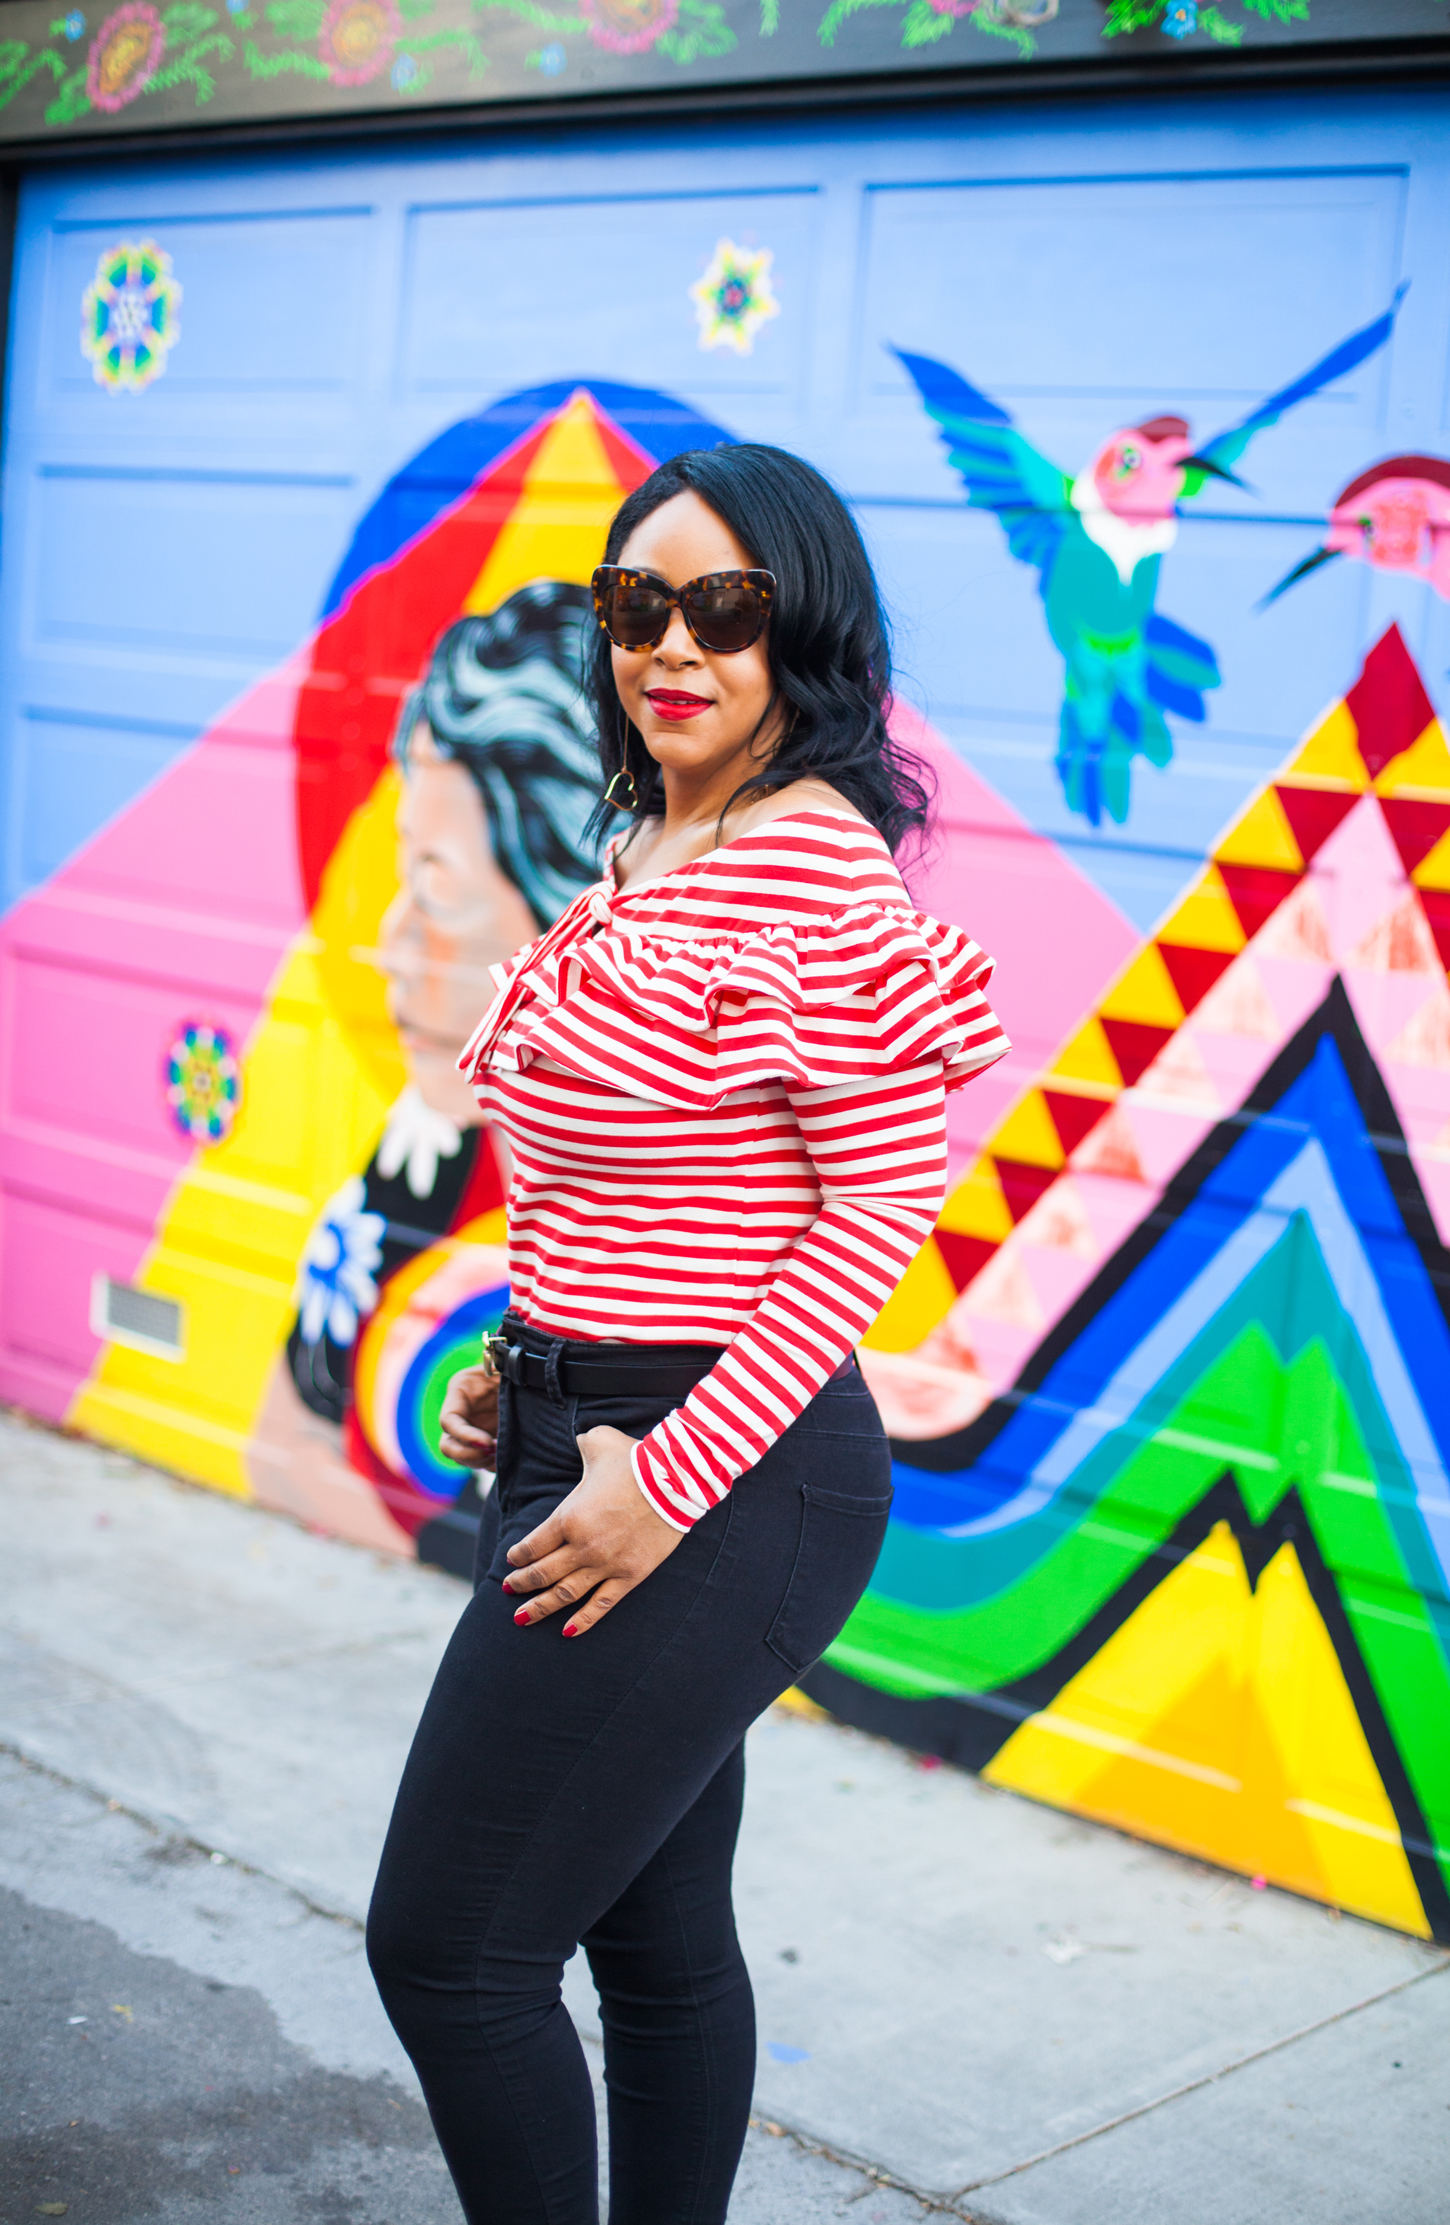 What's Your Mission? (Outfit details: H&M off-the-shoulder top in red & white stripe / Forever 21 High-Waisted Skinny Jeans / Gucci belt / Kiltie Nine West Govern d'Orsay Loafers) - Mission District, San Francisco